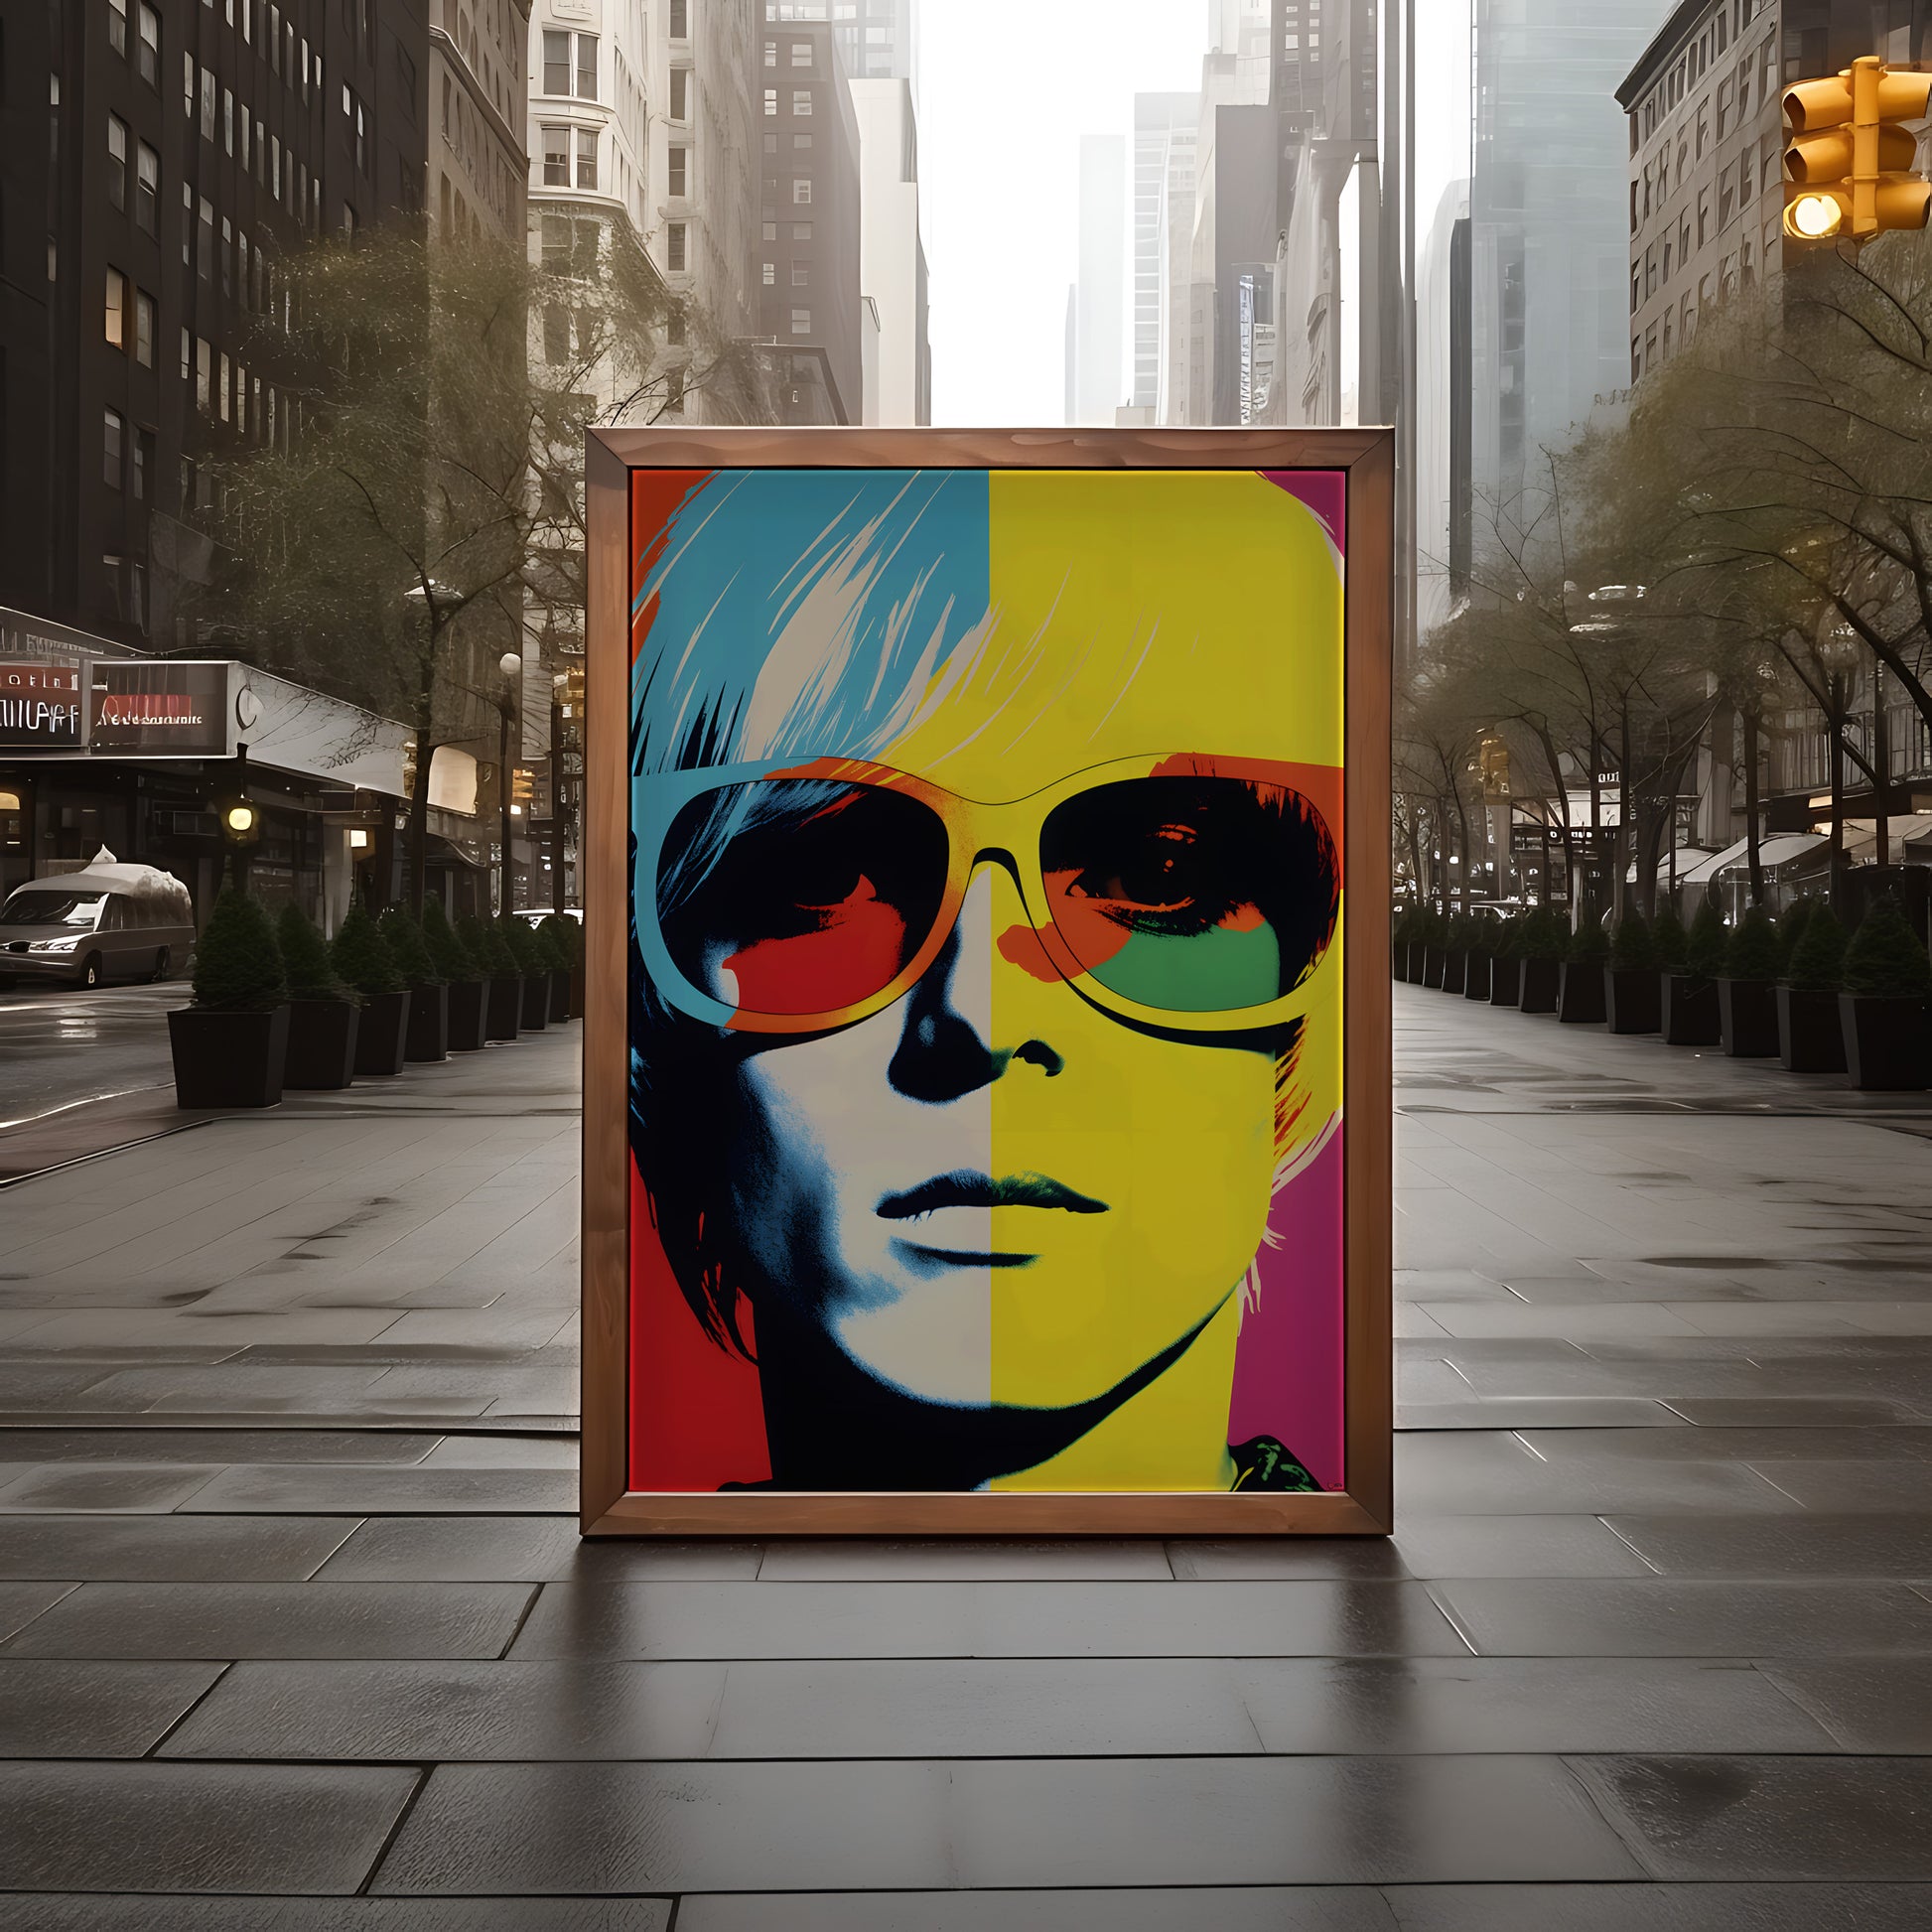 A colorful pop art portrait of a person with sunglasses displayed on an easel in an urban setting.